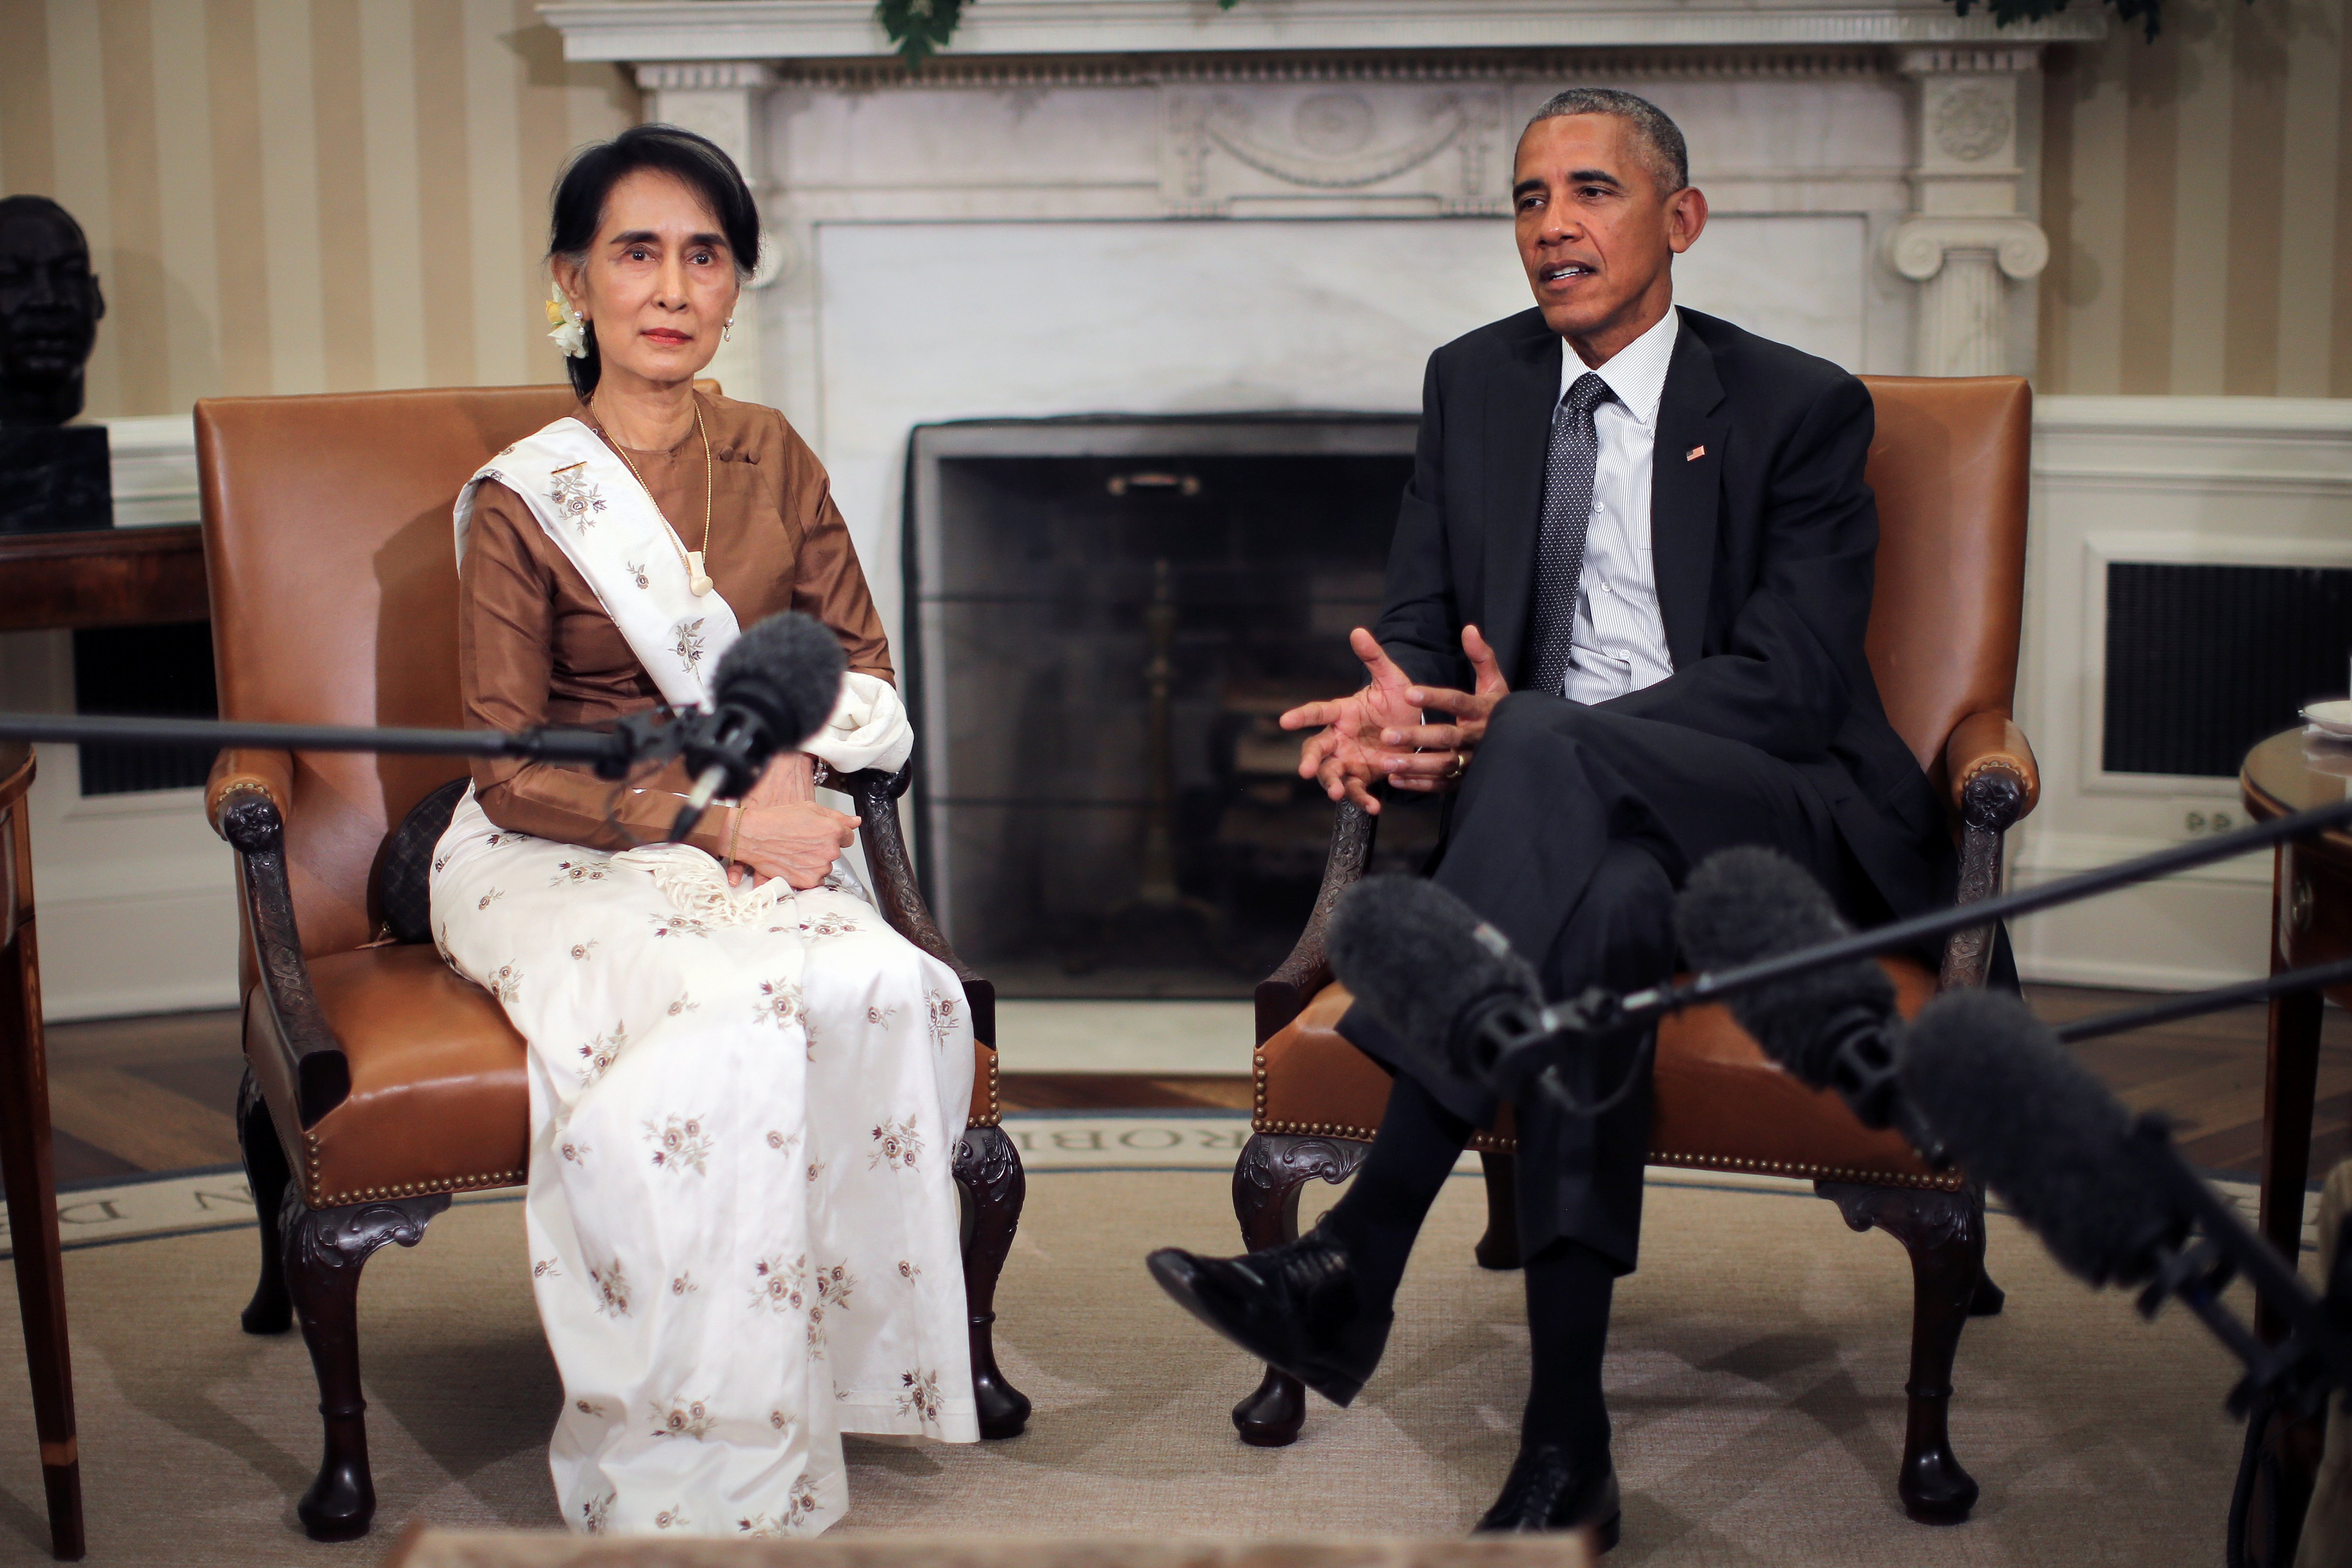 U.S. President Barack Obama talks to the media as he meets with Myanmar's State Counsellor Aung San Suu Kyi at the Oval Office of the White House in Washington